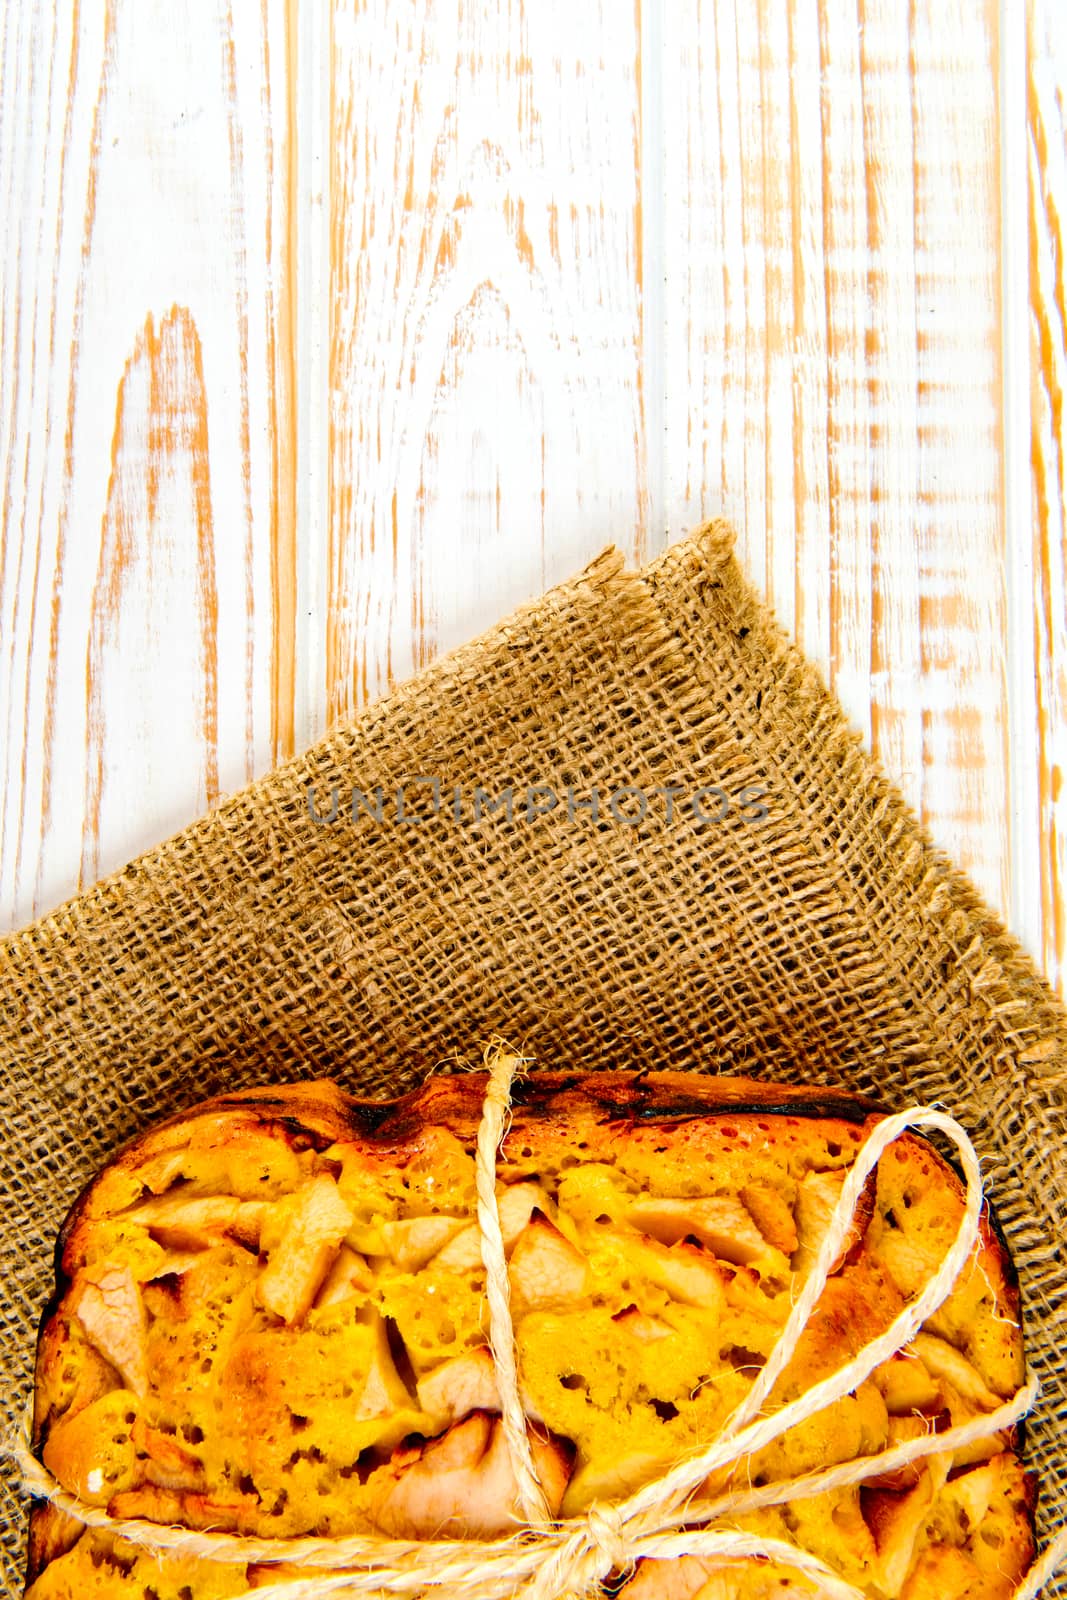 Fresh bakery. Top view of baked pie with apples on sackcloth on a white wooden background. Rustic style.